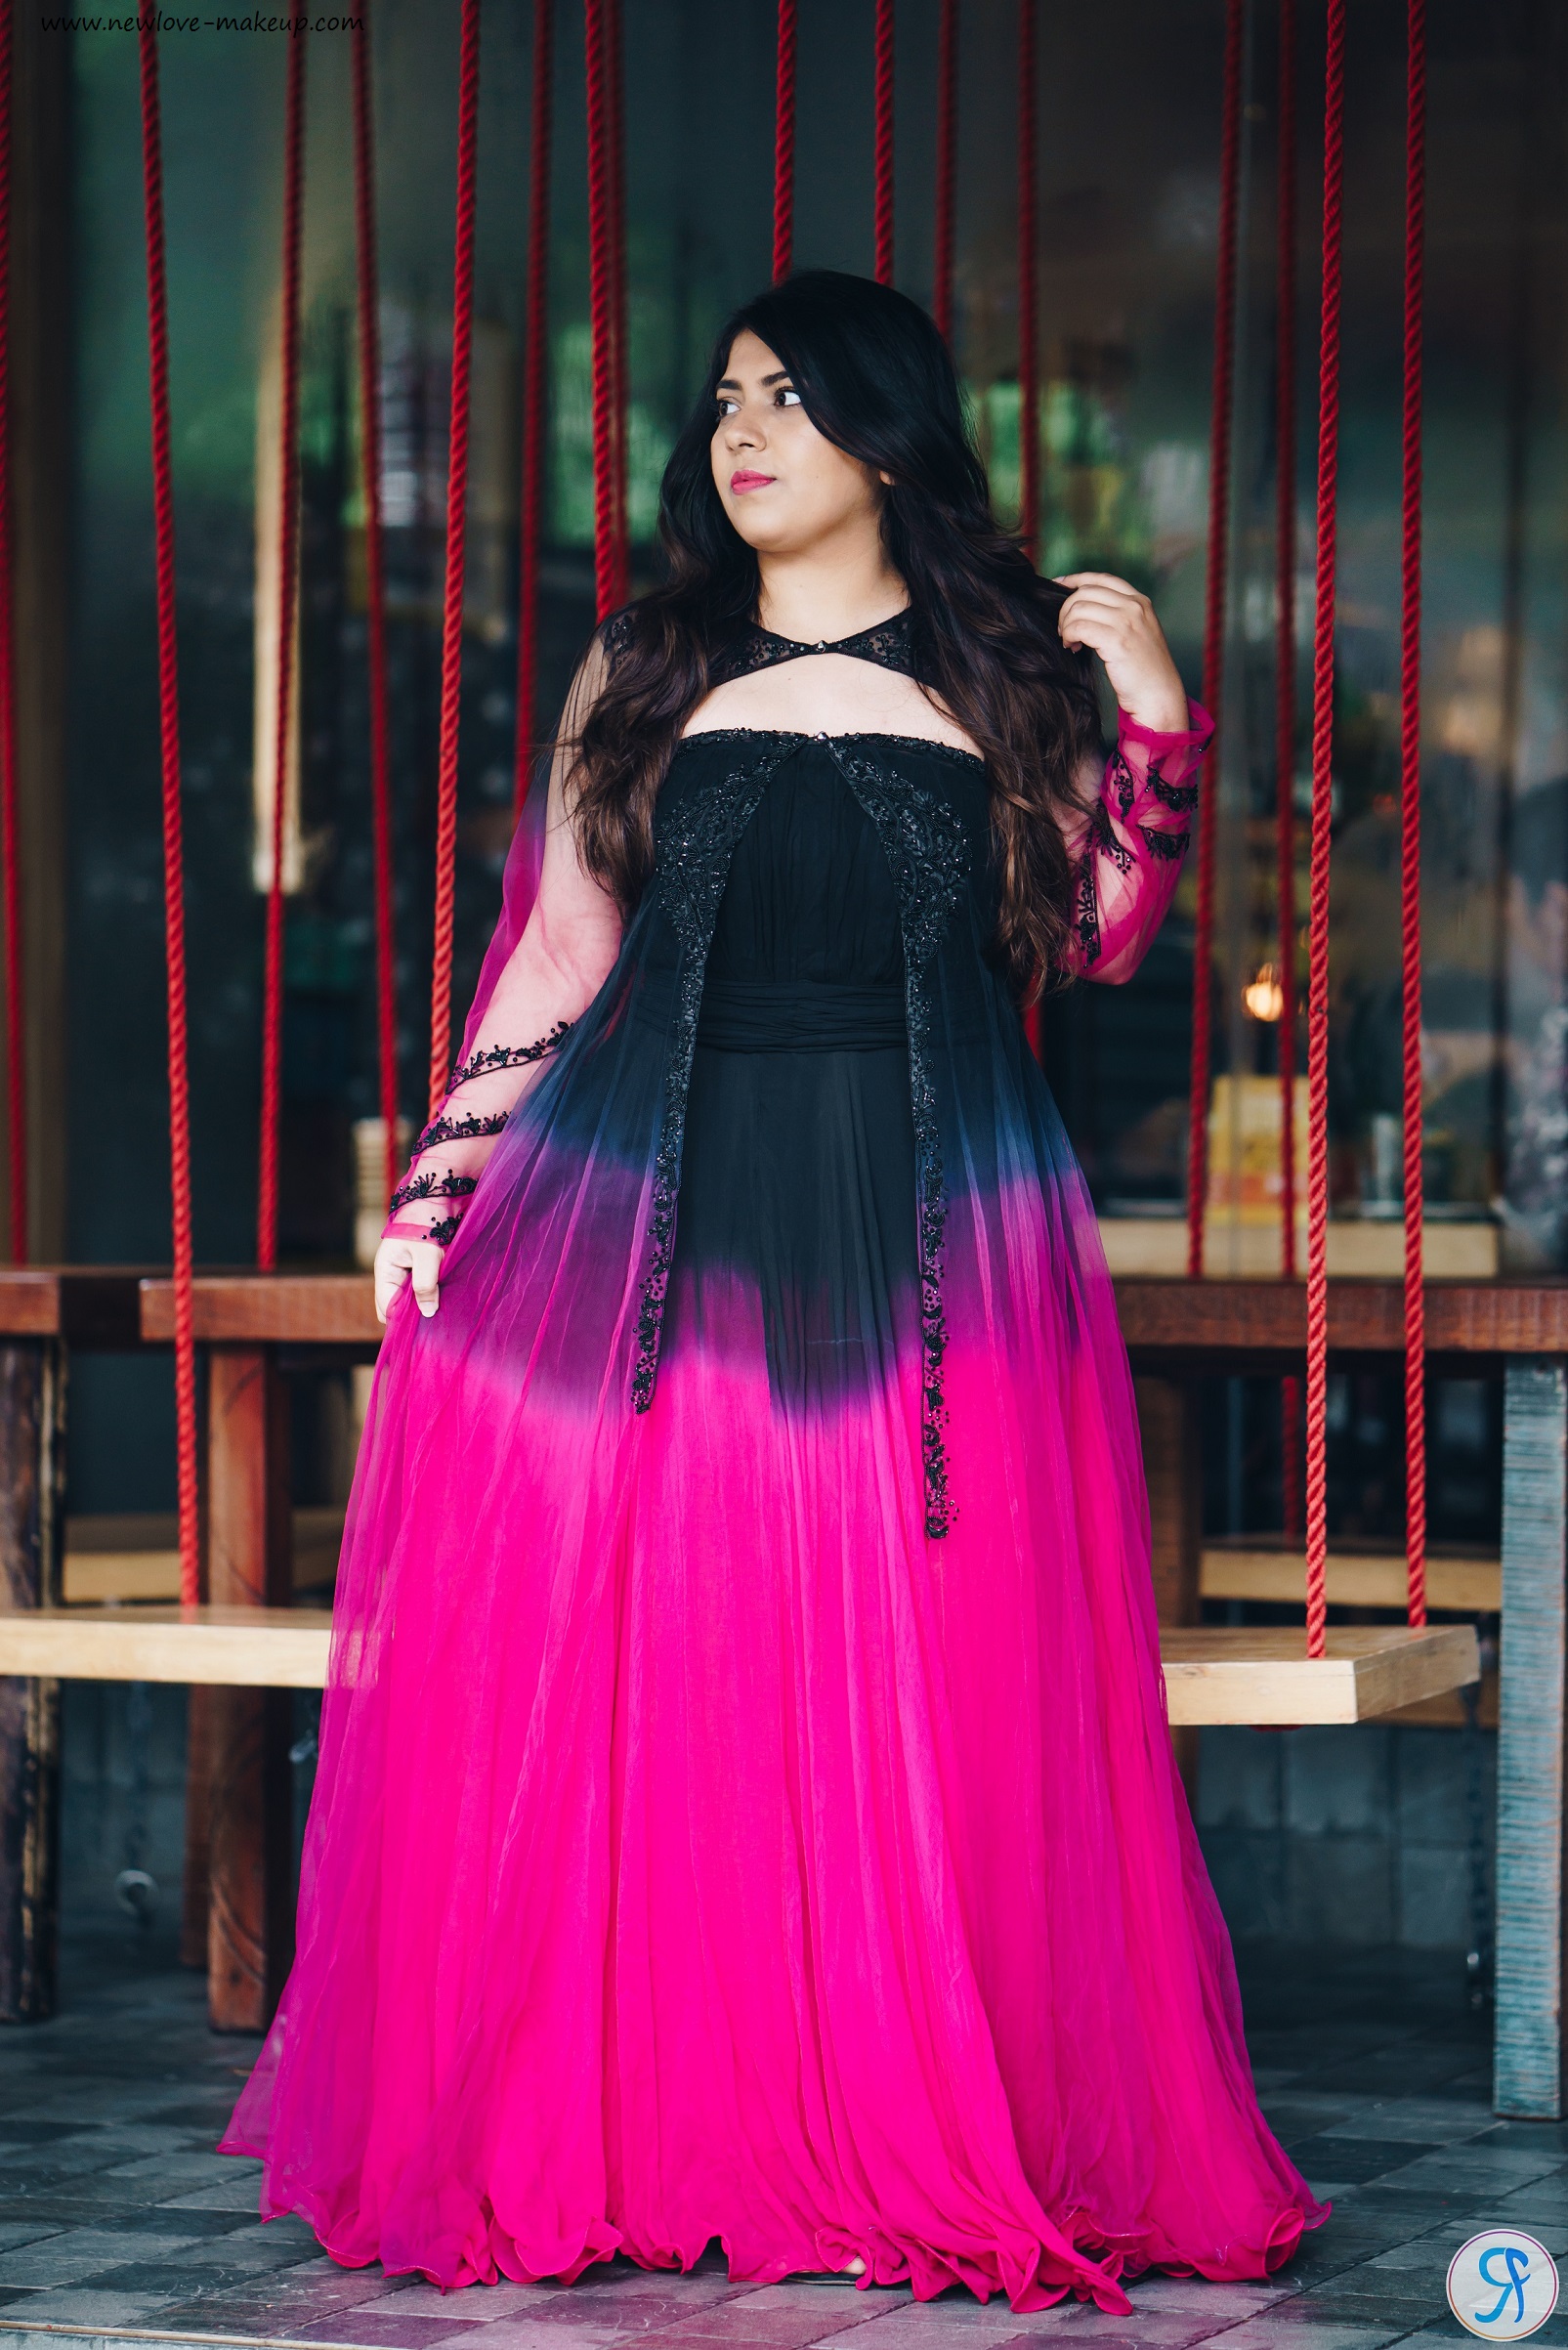 OOTD: Black & Fuchsia Pink Ombre Maxi Dress with Embellished Cape